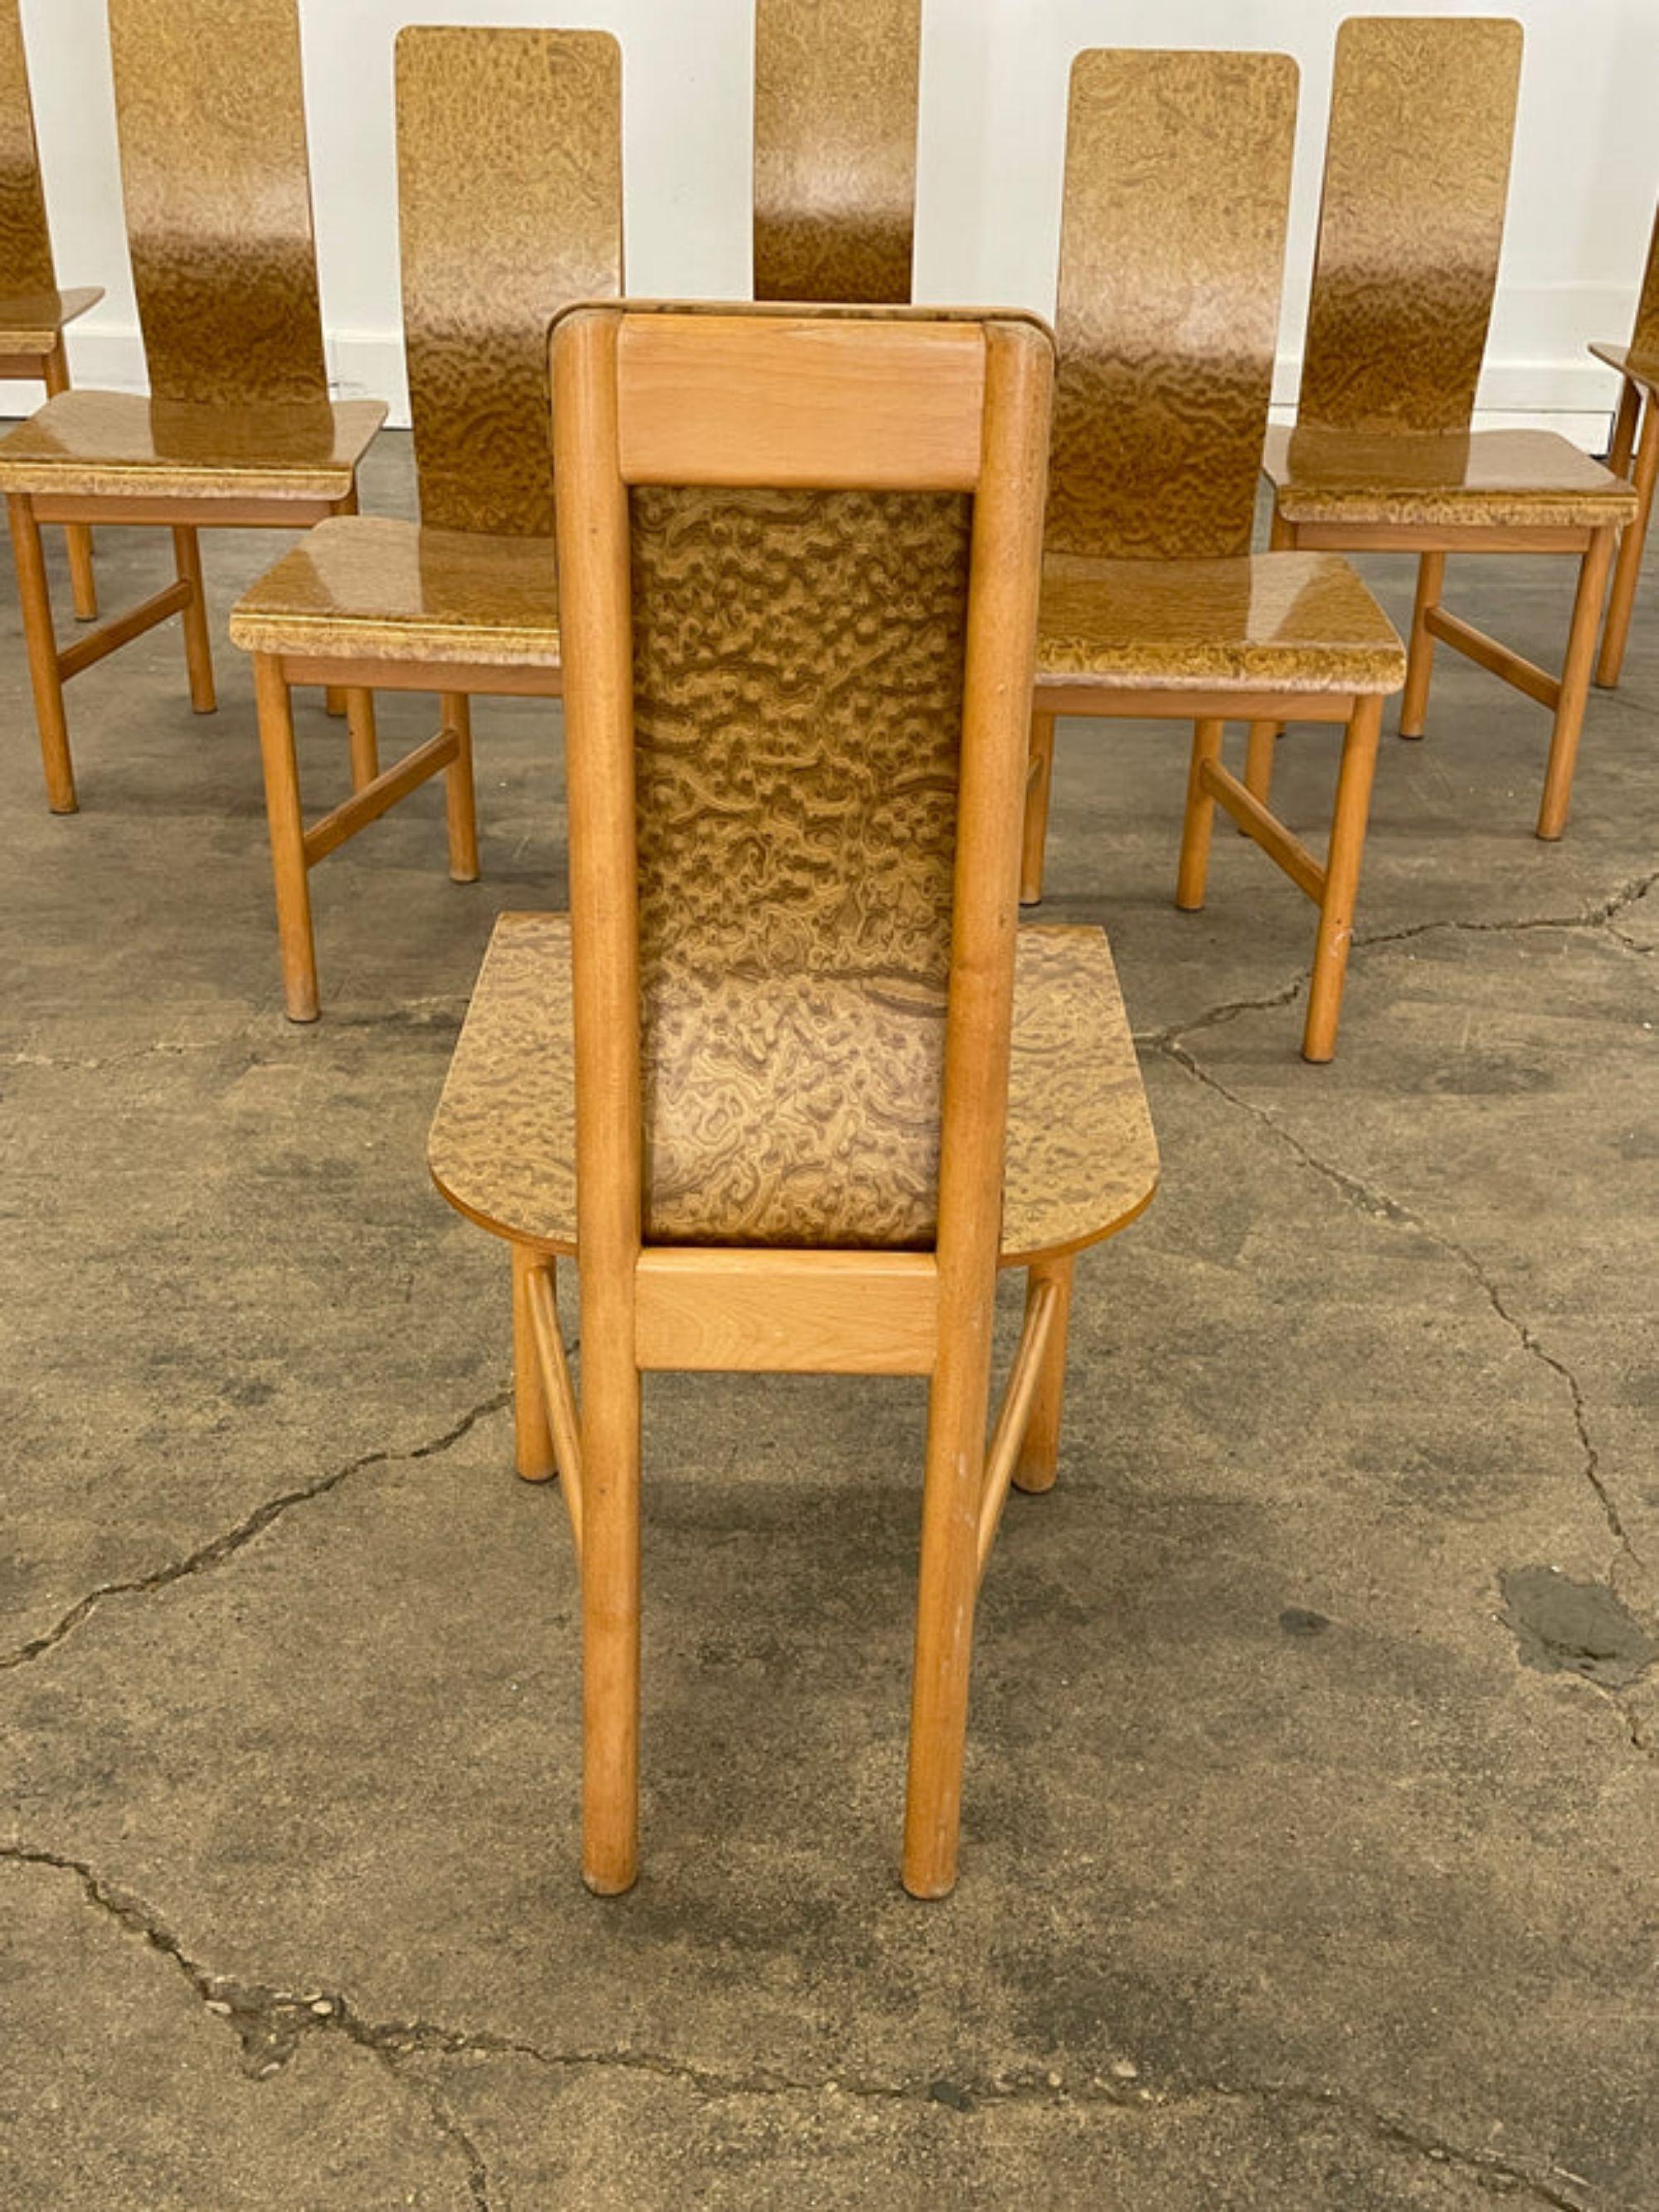 Molded Set of 8 “Vela” Dining Chairs in Burlwood by Enzo Mari, Driade, Italy, 1977